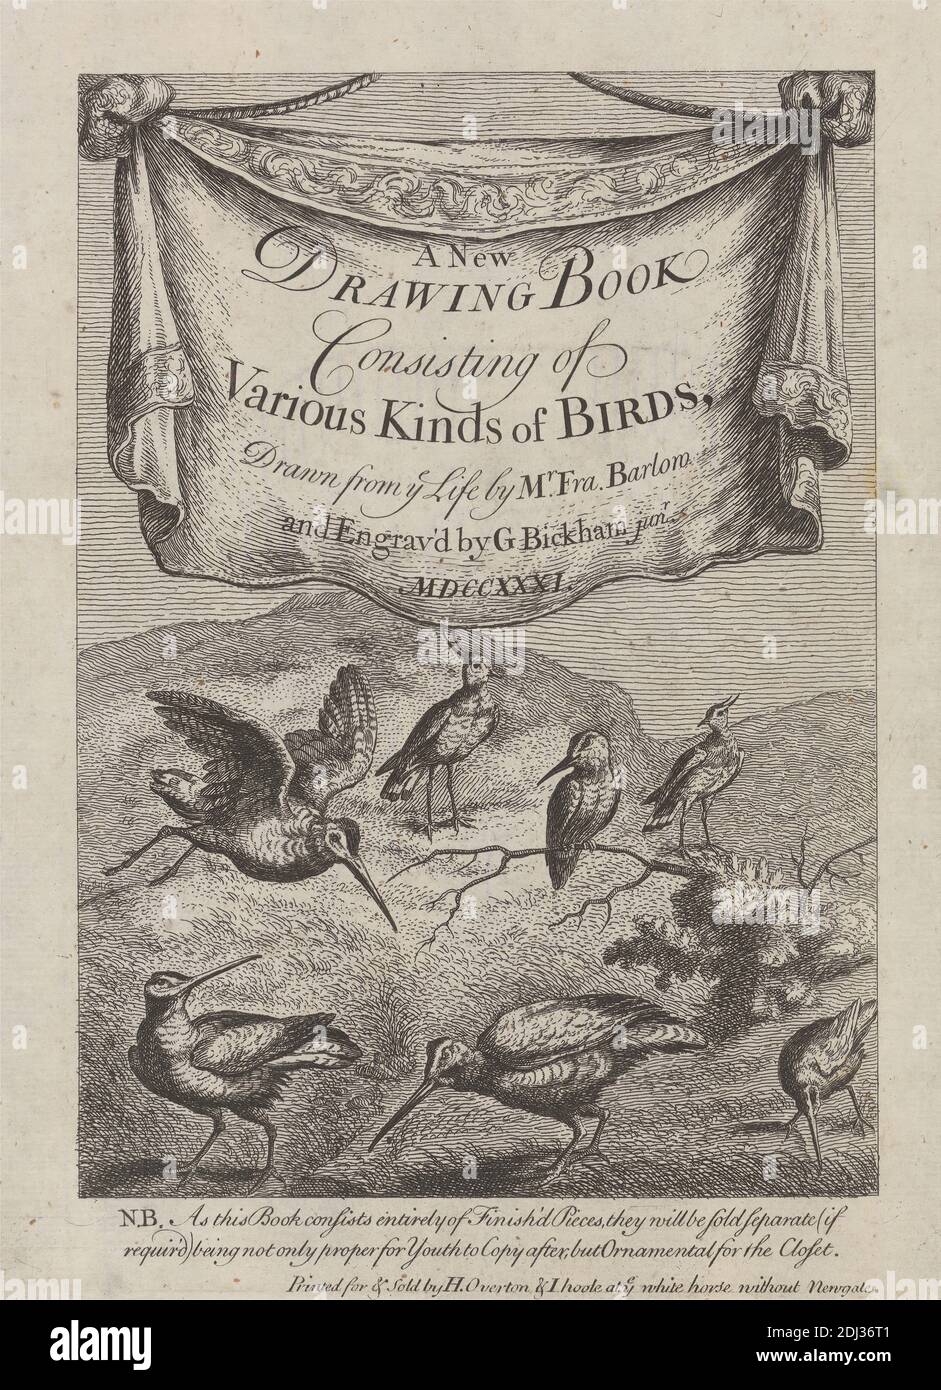 Title page for ' A New Drawing Book...of Various Kinds of Birds, Drawn from the Life by Mr. Francis Barlow' 1731 (1 of 9), Print made by George Bickham, 1683/4–1758, British, after Francis Barlow, ca. 1626–1704, British, Published by Henry Overton, 1675/6–1751, British, 1731, Etching on medium, smooth, cream laid paper, Sheet: 11 1/8 x 7 5/16 inches (28.3 x 18.6 cm), Plate: 8 3/8 x 6 3/16 inches (21.3 x 15.7 cm), and Image: 7 1/8 x 5 1/8 inches (18.1 x 13 cm), animal art, birds, drapery, hills, plants, sandpipers Stock Photo